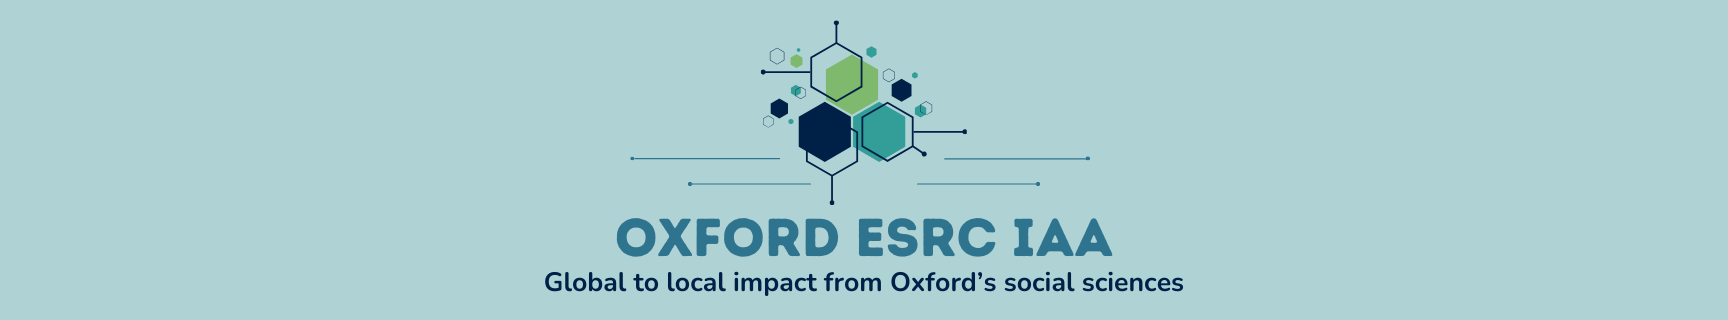 Oxford ESRC IAA Global to local impact from Oxford's social sciences